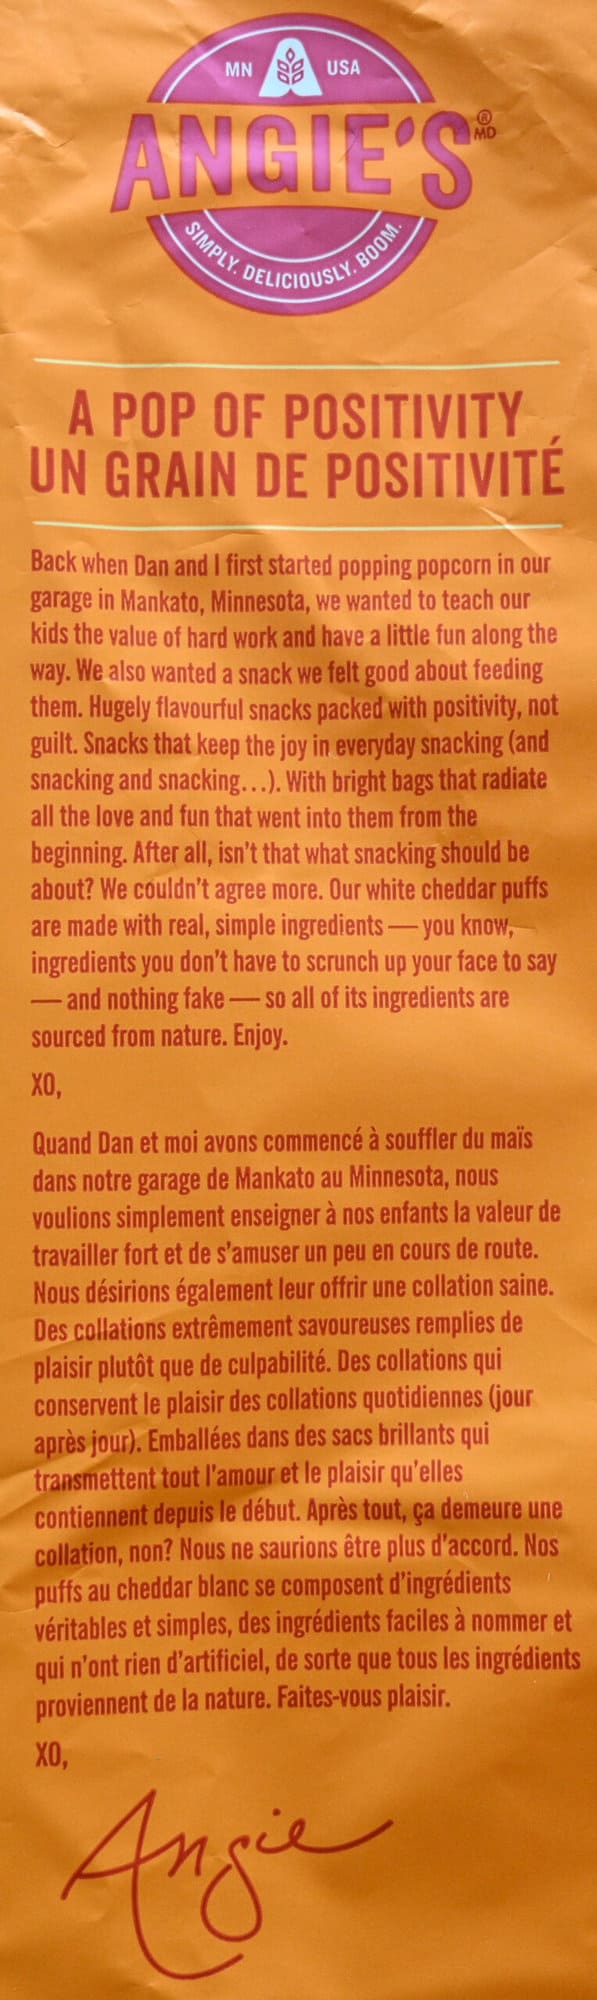 Image of the product description from the back of the bag.